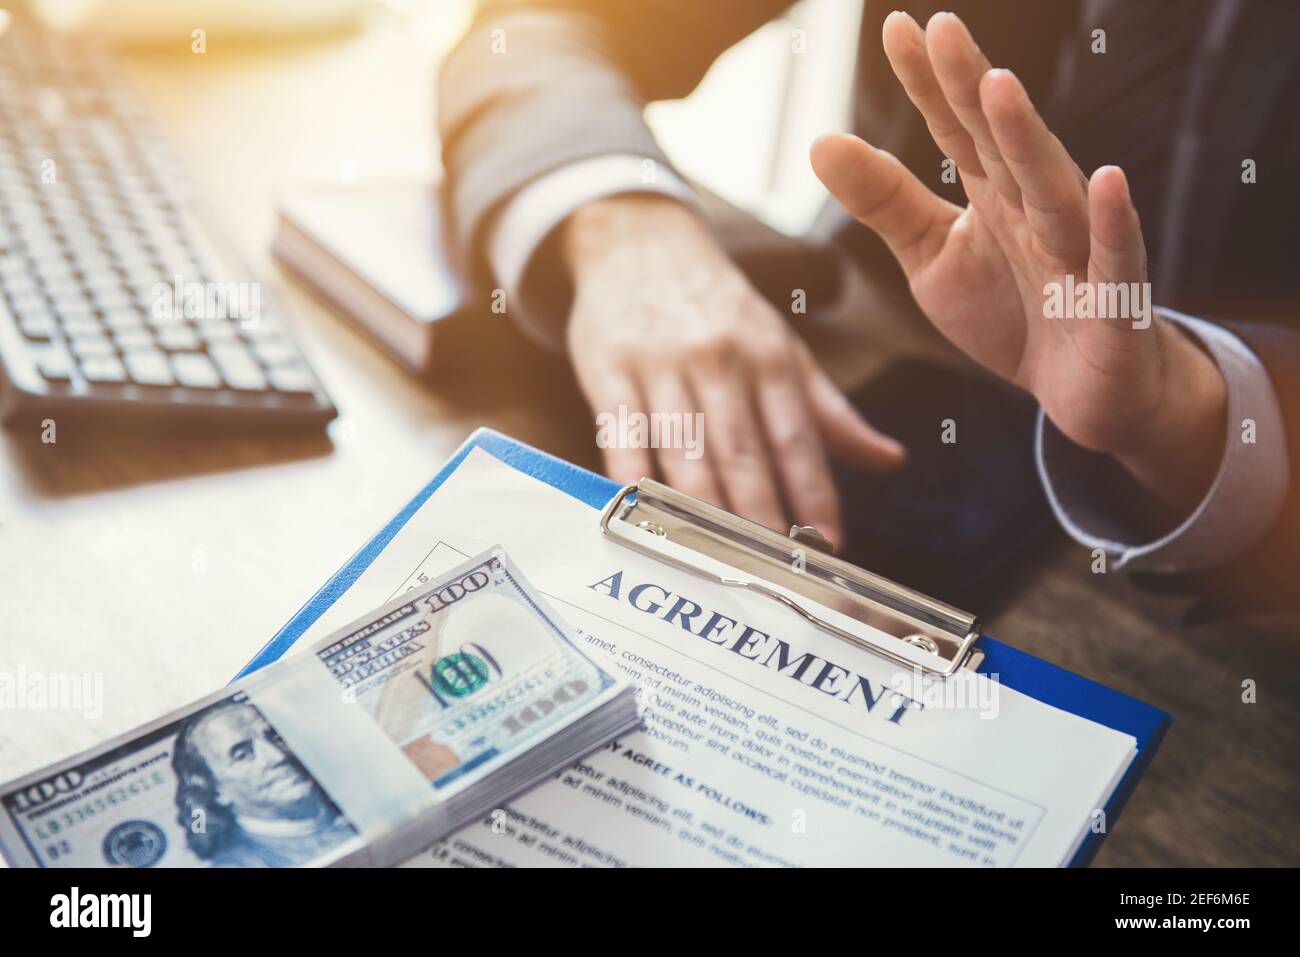 Businessman refusing money,US dollar bills, that come with agreement paper - anti bribery and corruption concepts Stock Photo